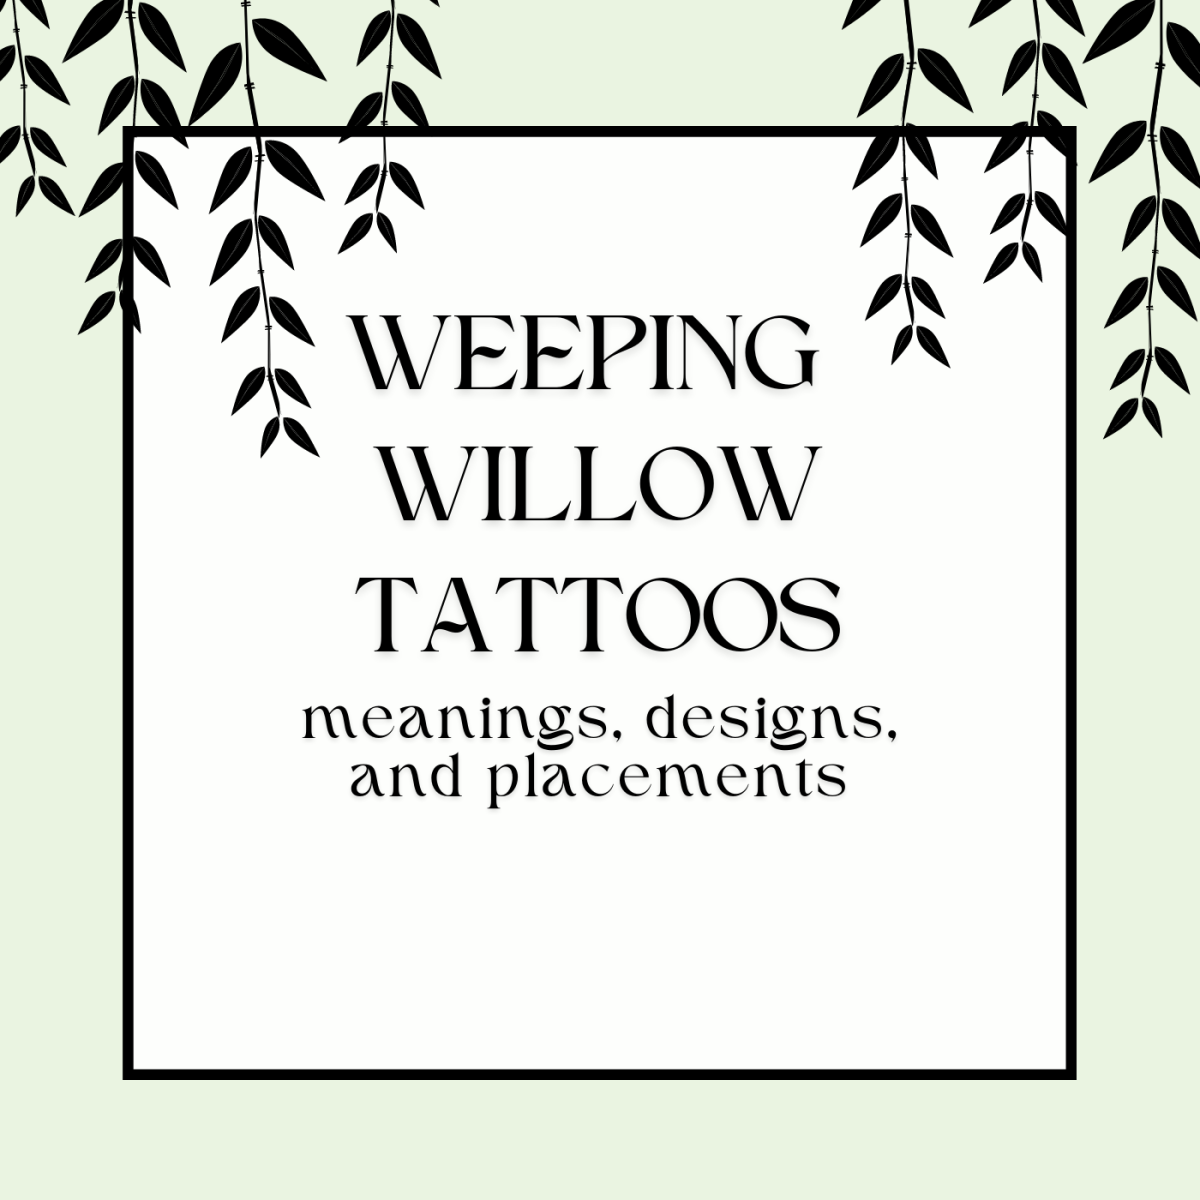 Are you thinking about getting a weeping willow tattoo? Keep reading for some inspiration.